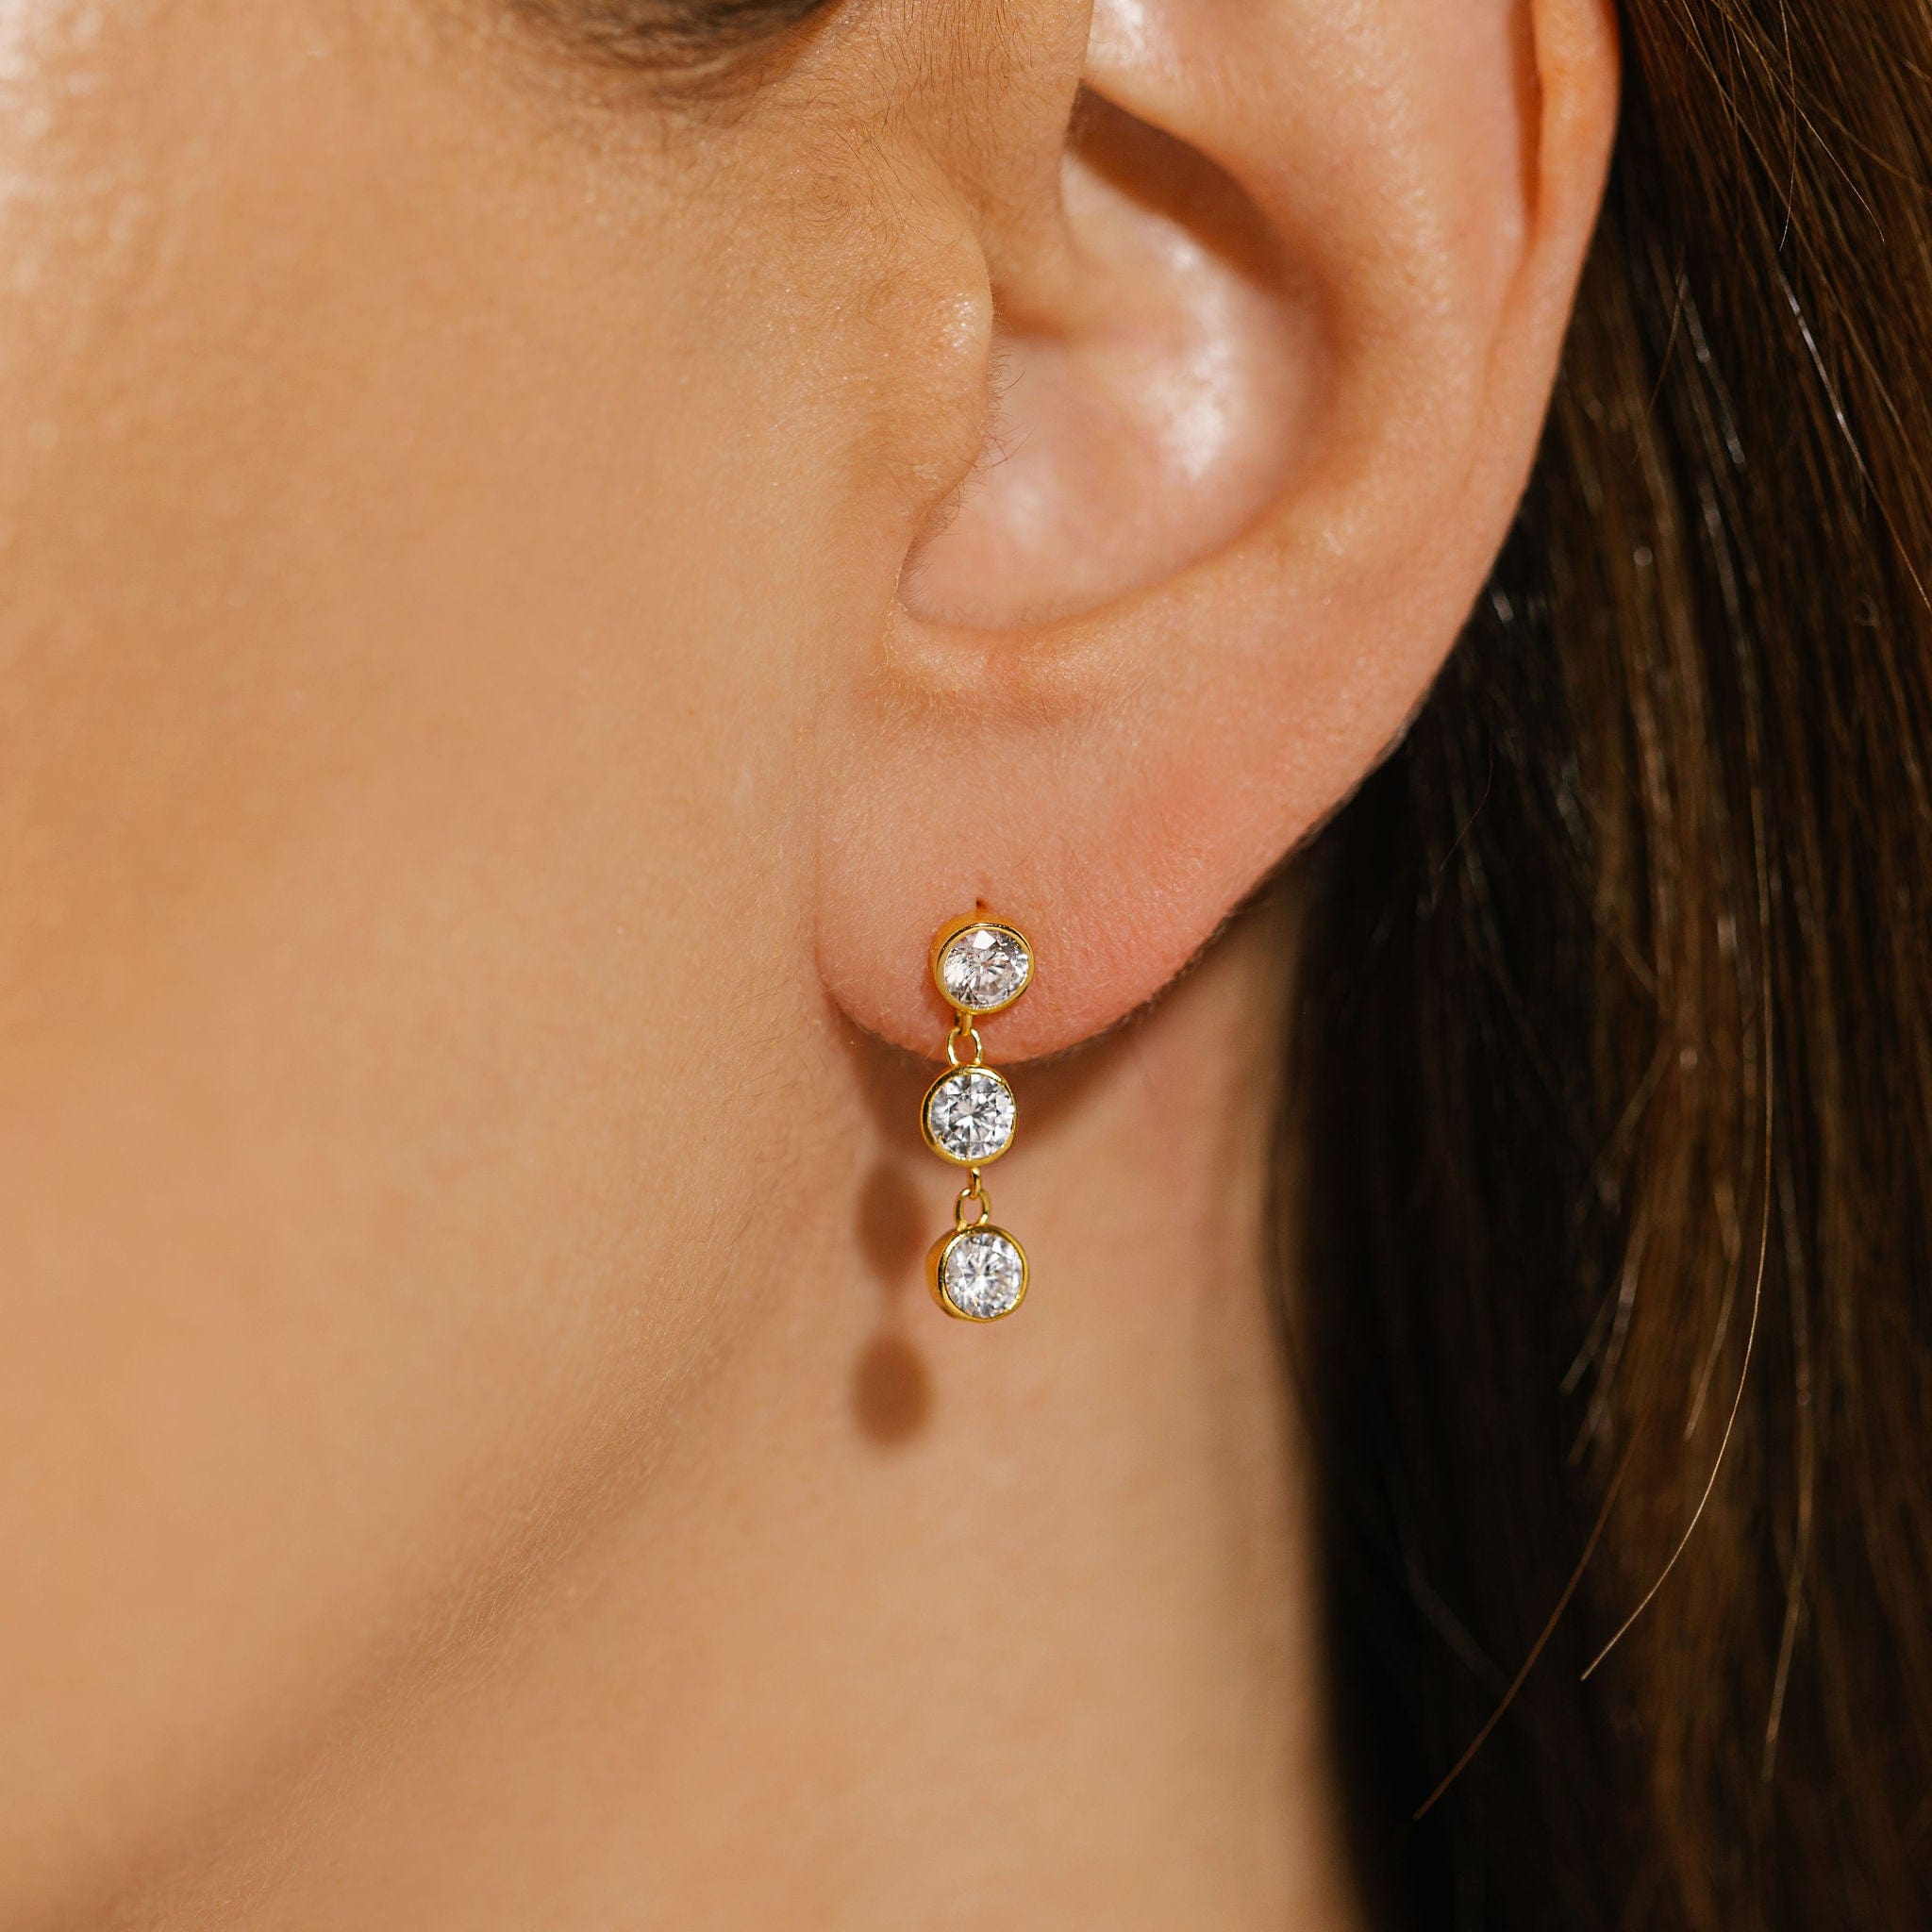 The three sparkling crystals of the Coquille Strand Stud earring gracefully trail downward from the model's ear. 